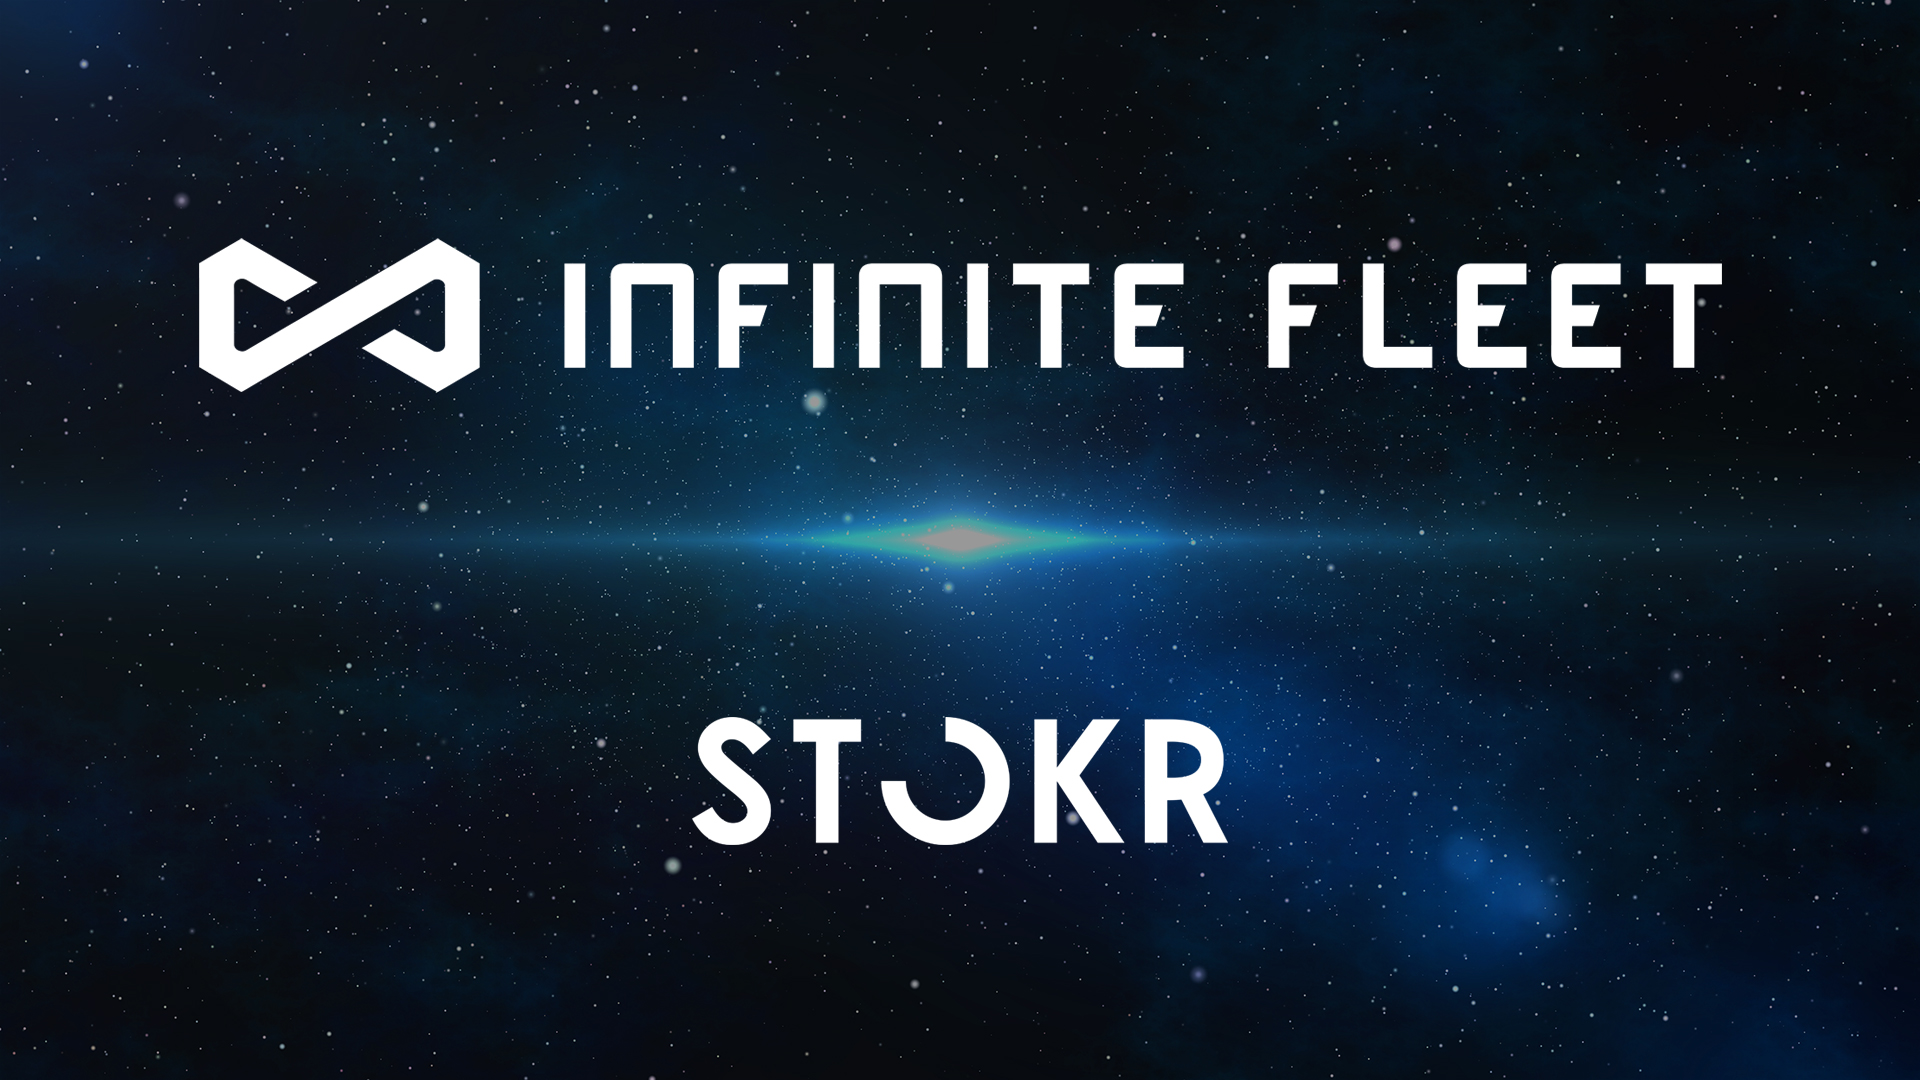 Infinite Fleet launches STO on STOKR, led by US$1 Million Investment from Tether.